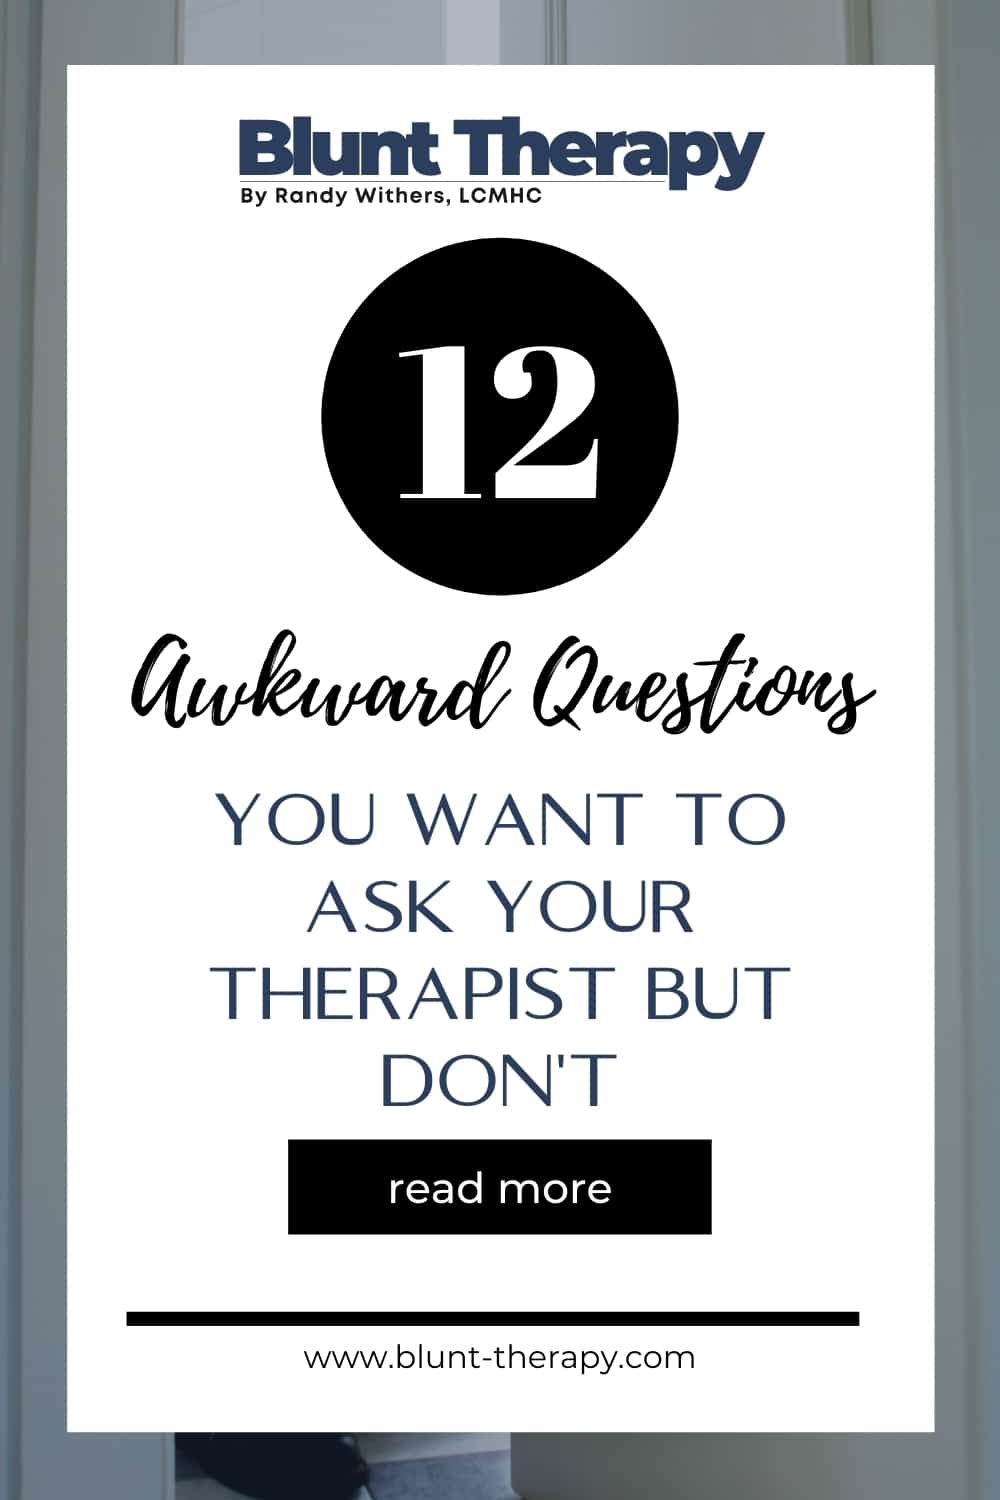 12 Awkward Questions You Want To Ask Your Therapist But Don't (According To Google)